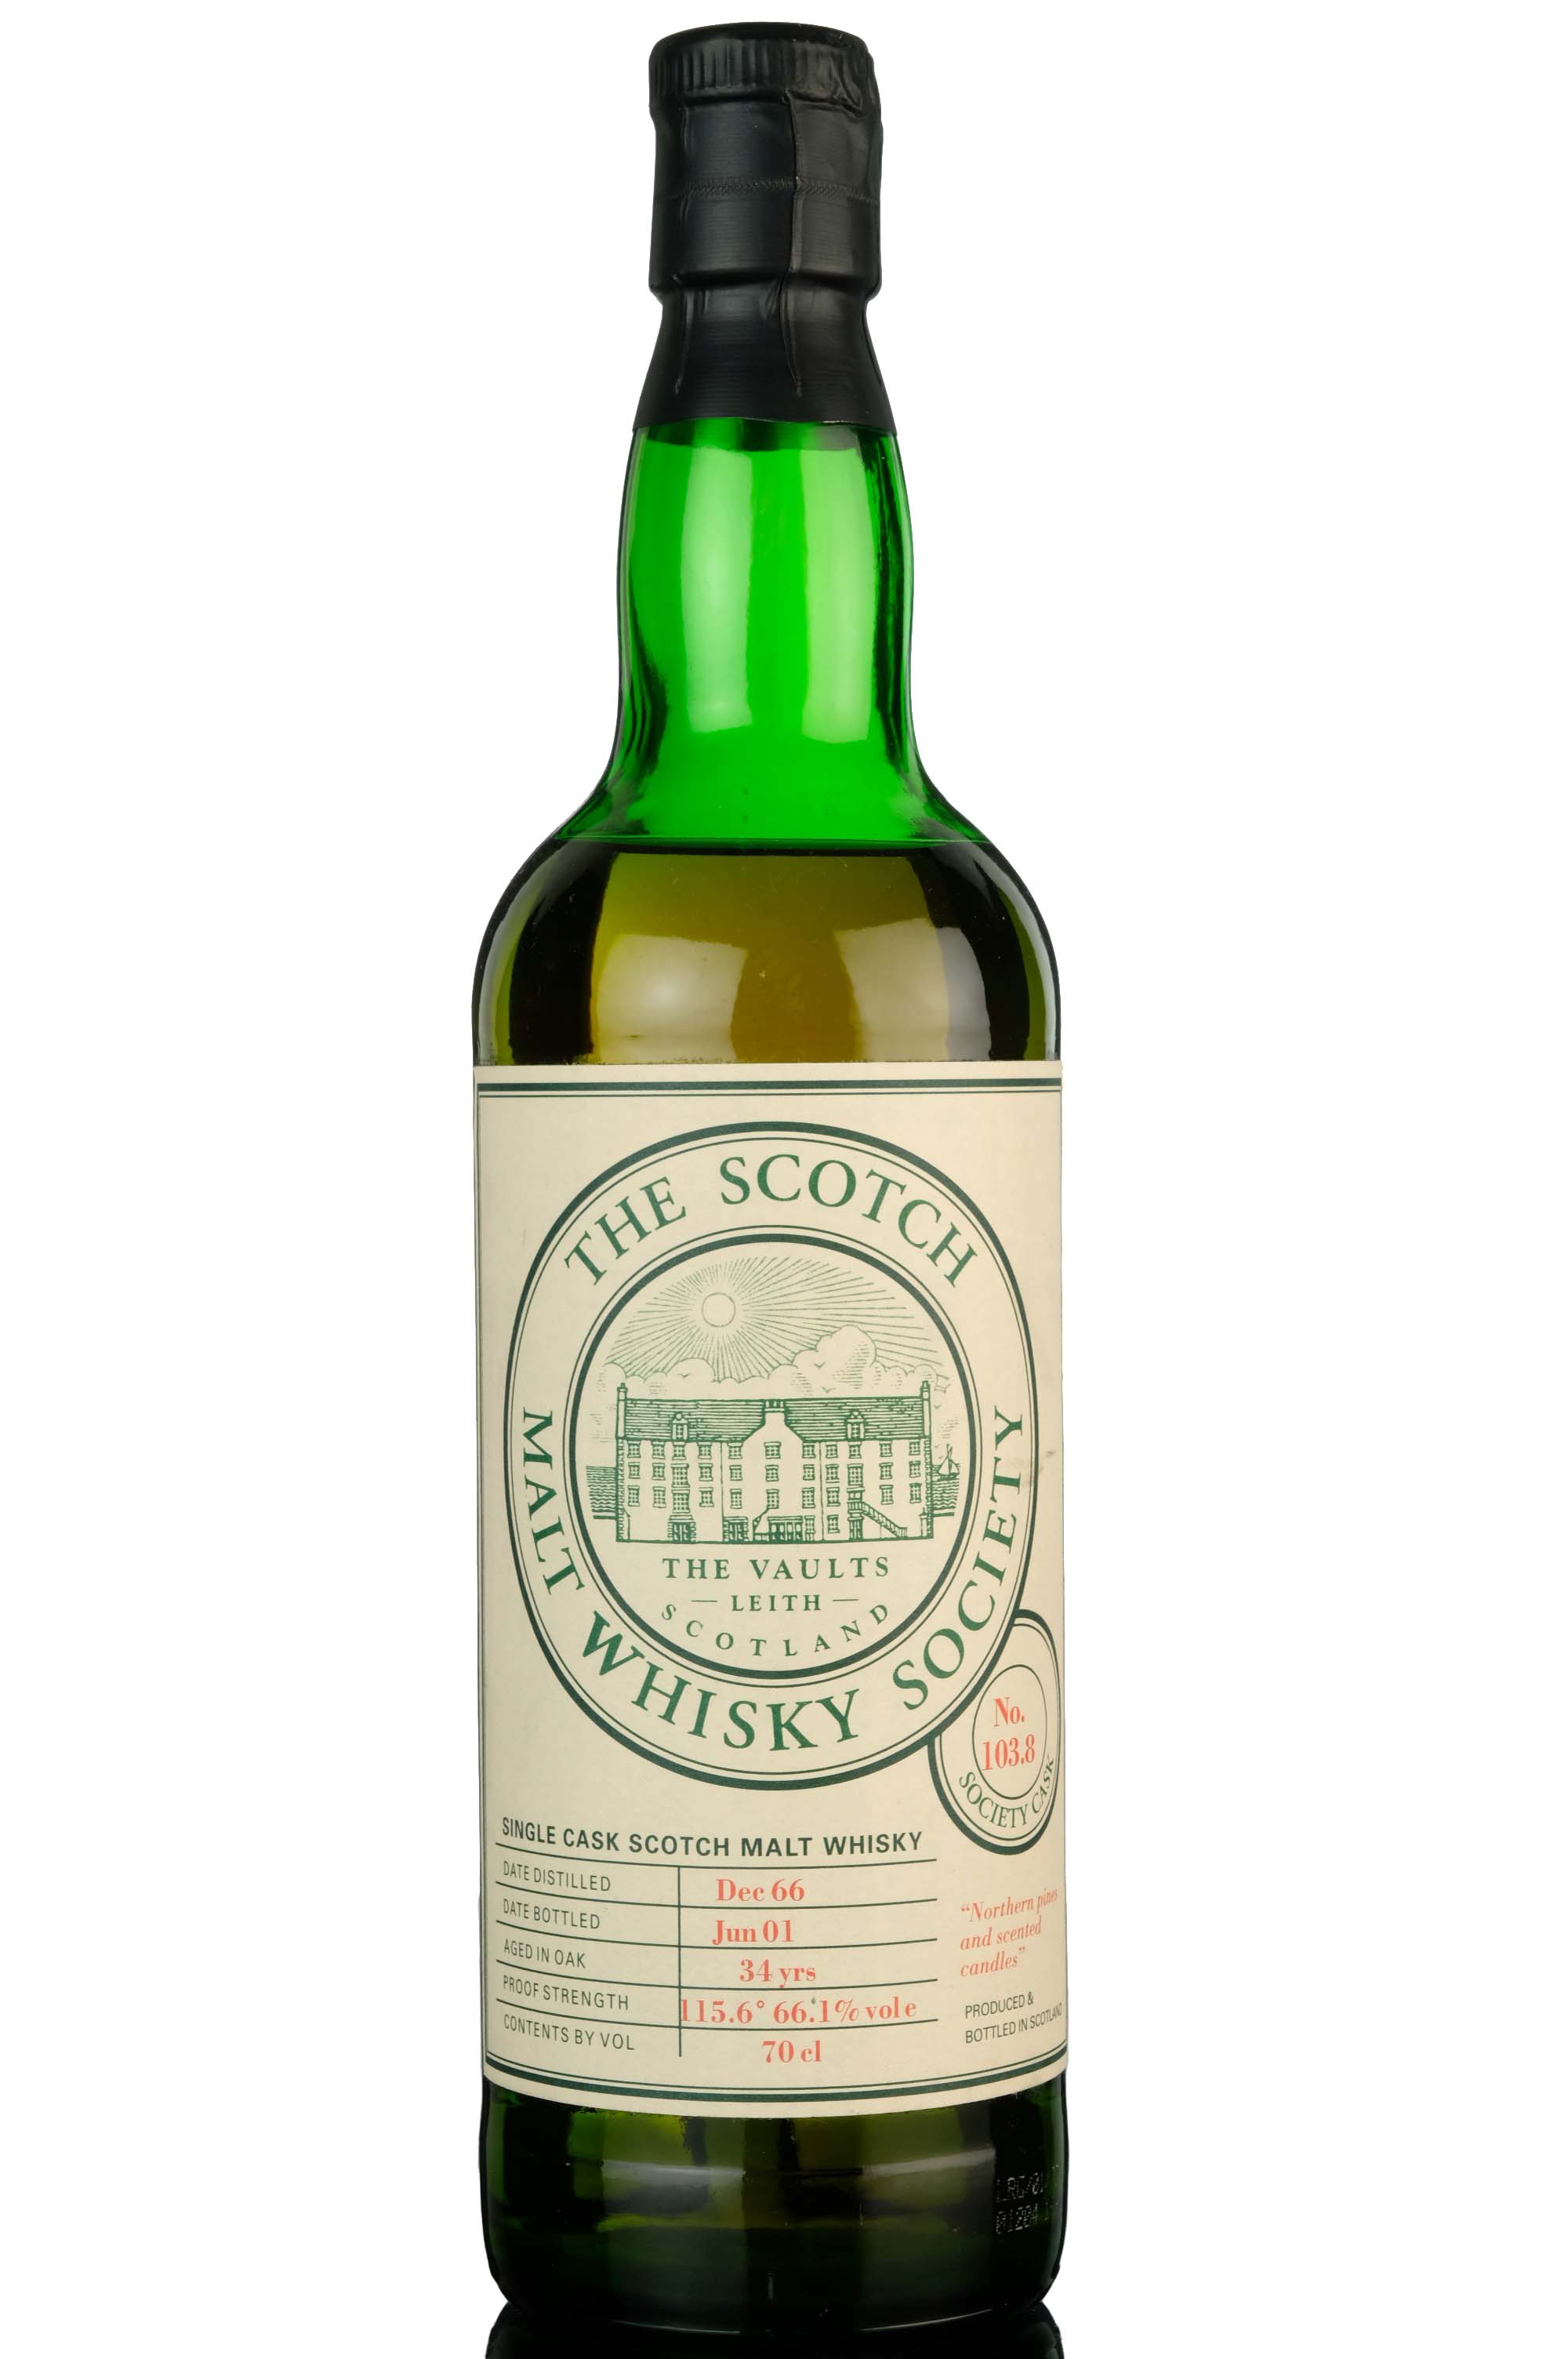 Royal Lochnagar 1966-2001 - 34 Year Old - SMWS 103.8 - Northern Pines & Scented Candles